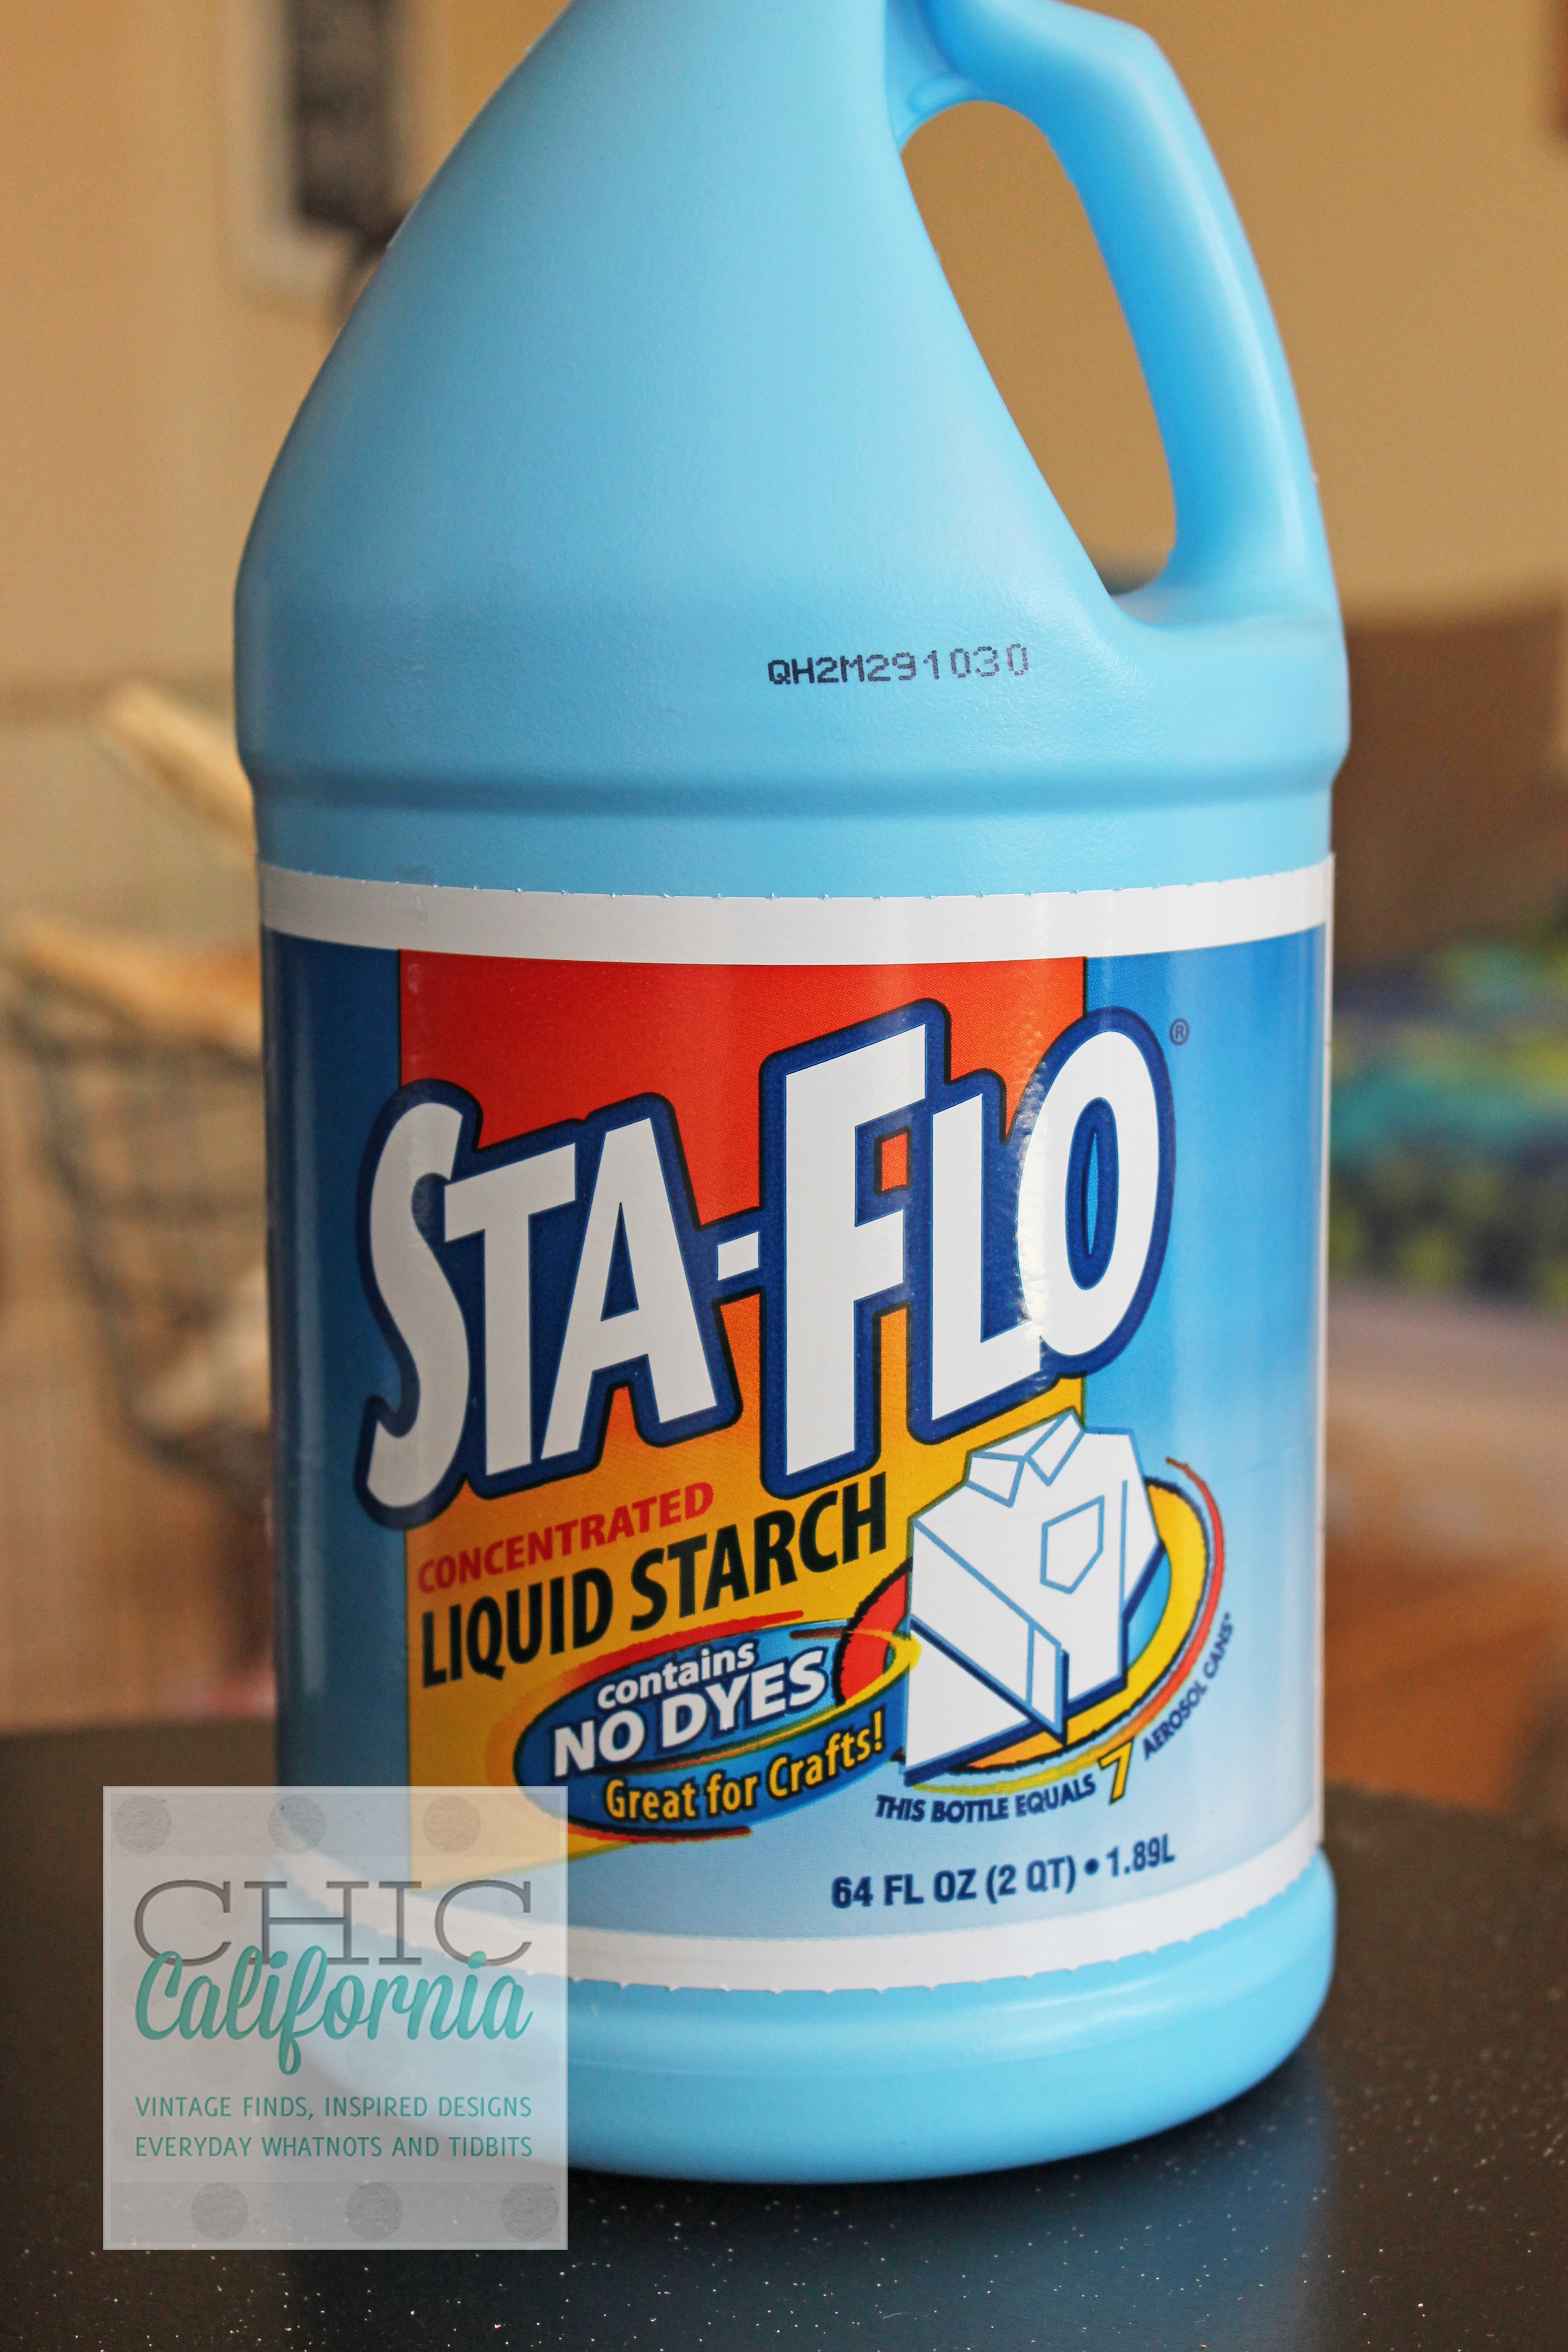 Find more New Sta-flo Concentrated Liquid Starch, 64 Fl Oz for